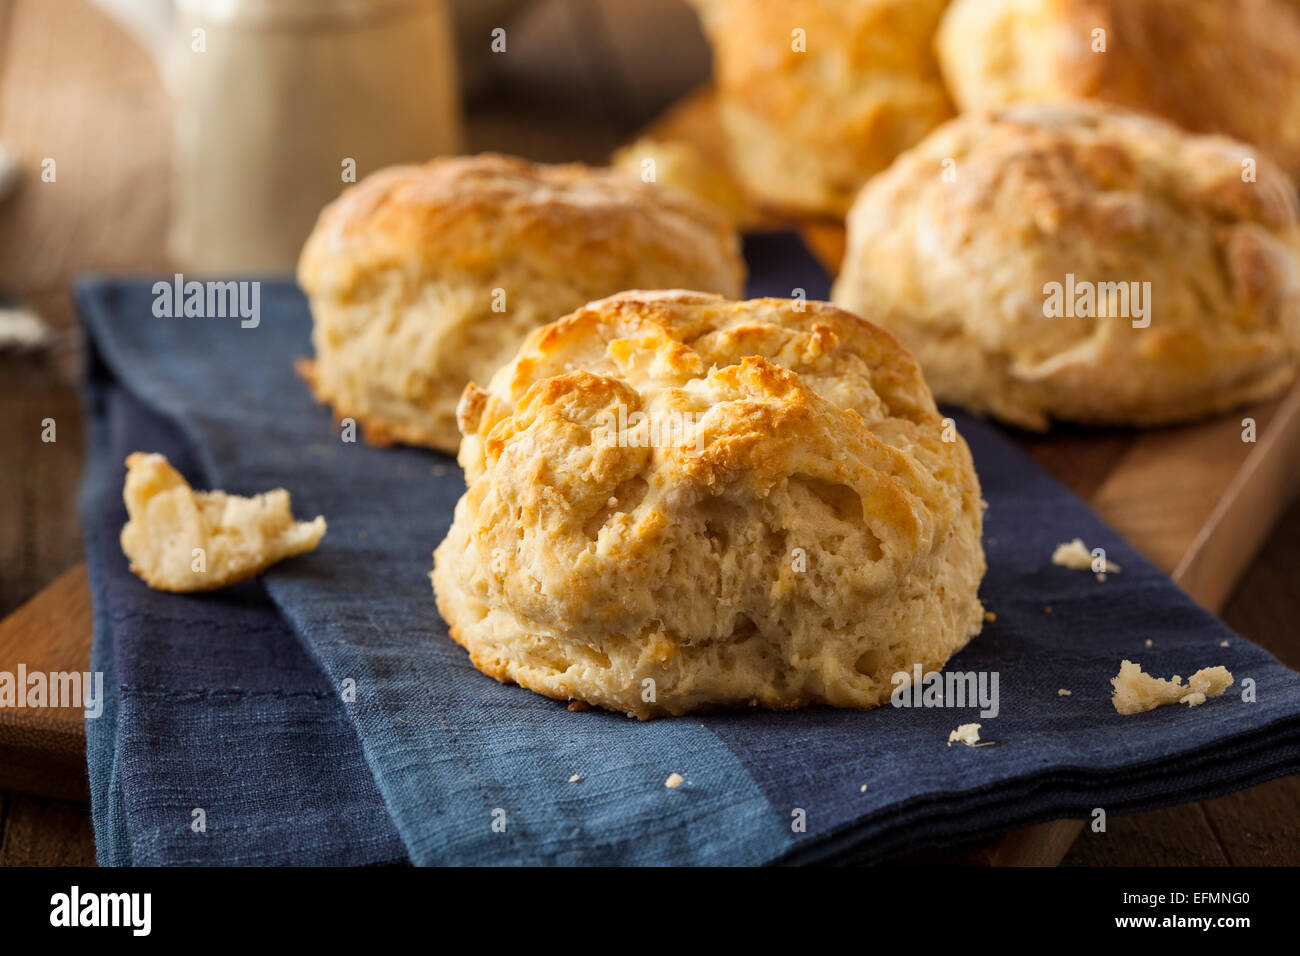 Homemade Flakey Buttermilk Biscuits Ready to Eat Stock Photo